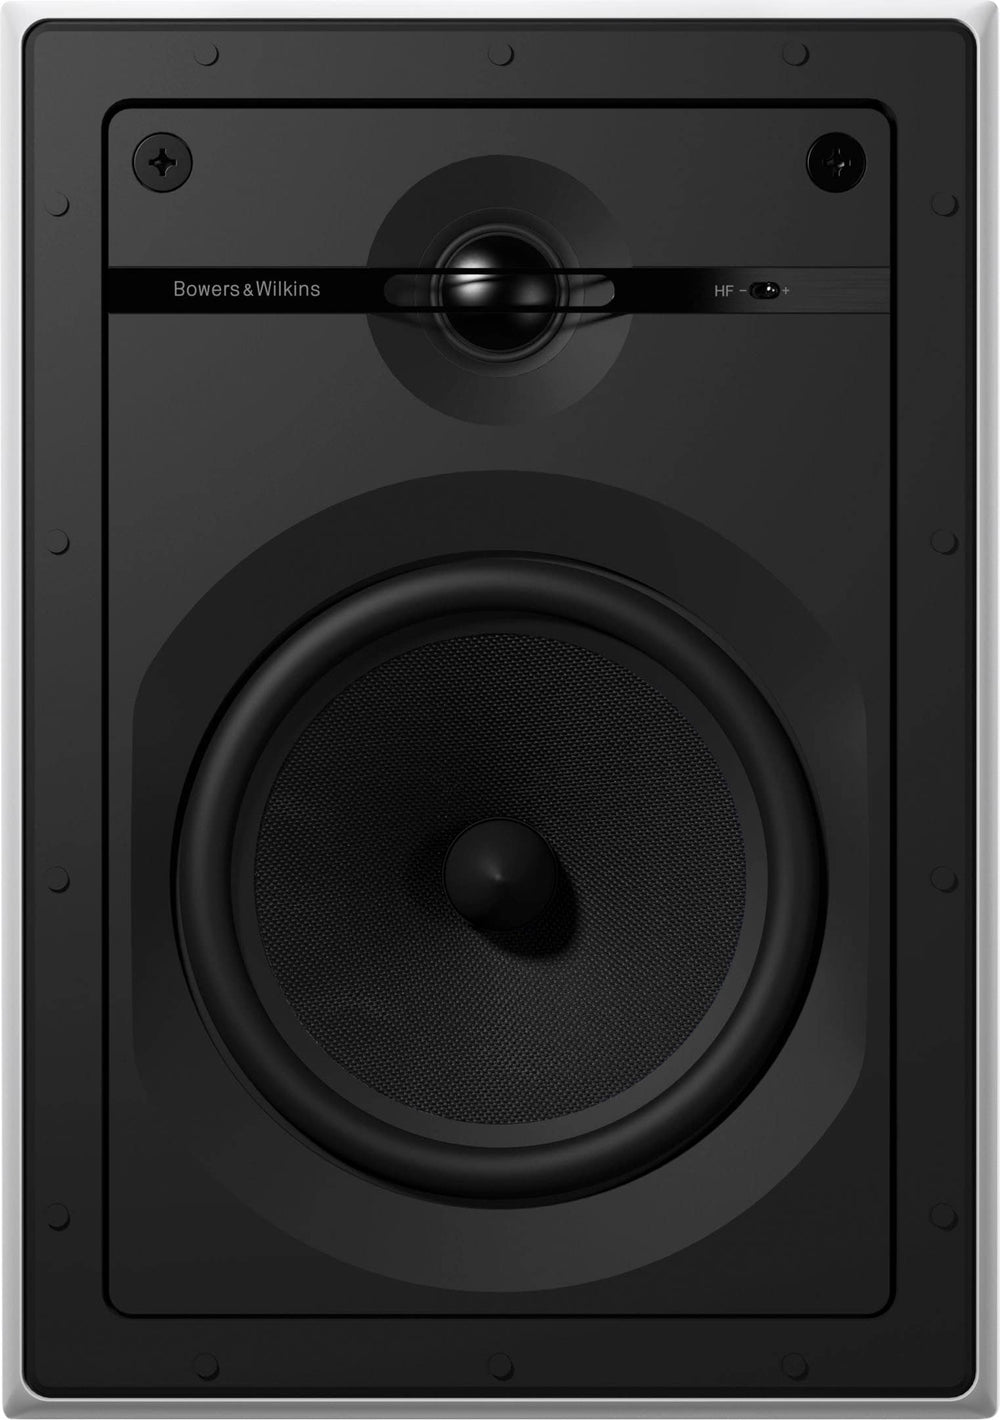 Bowers & Wilkins - CI600 Series 664 6" In-Wall Speakers w/Glass Fiber Midbass- Paintable White (Pair) - White_1